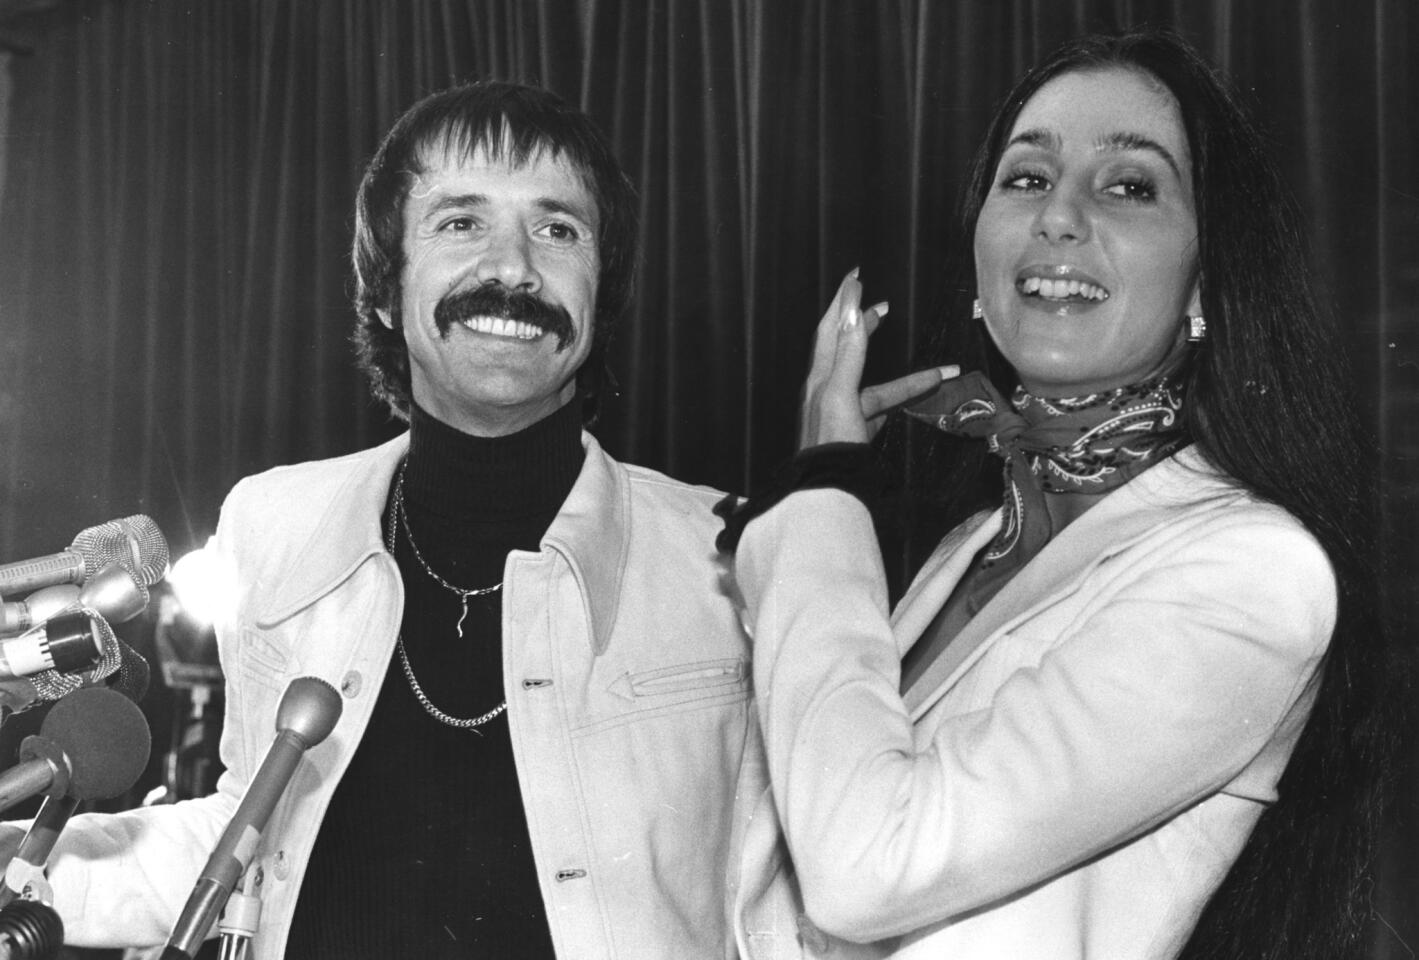 Sonny Bono and Cher were a pop duo who eventually turned into husband and wife after the birth of Chastity (now Chaz) Bono. The pair rose to fame with their songs "I Got You Babe" and "Baby Don't Go." They released three studio albums together and sold more than 40 million albums worldwide.